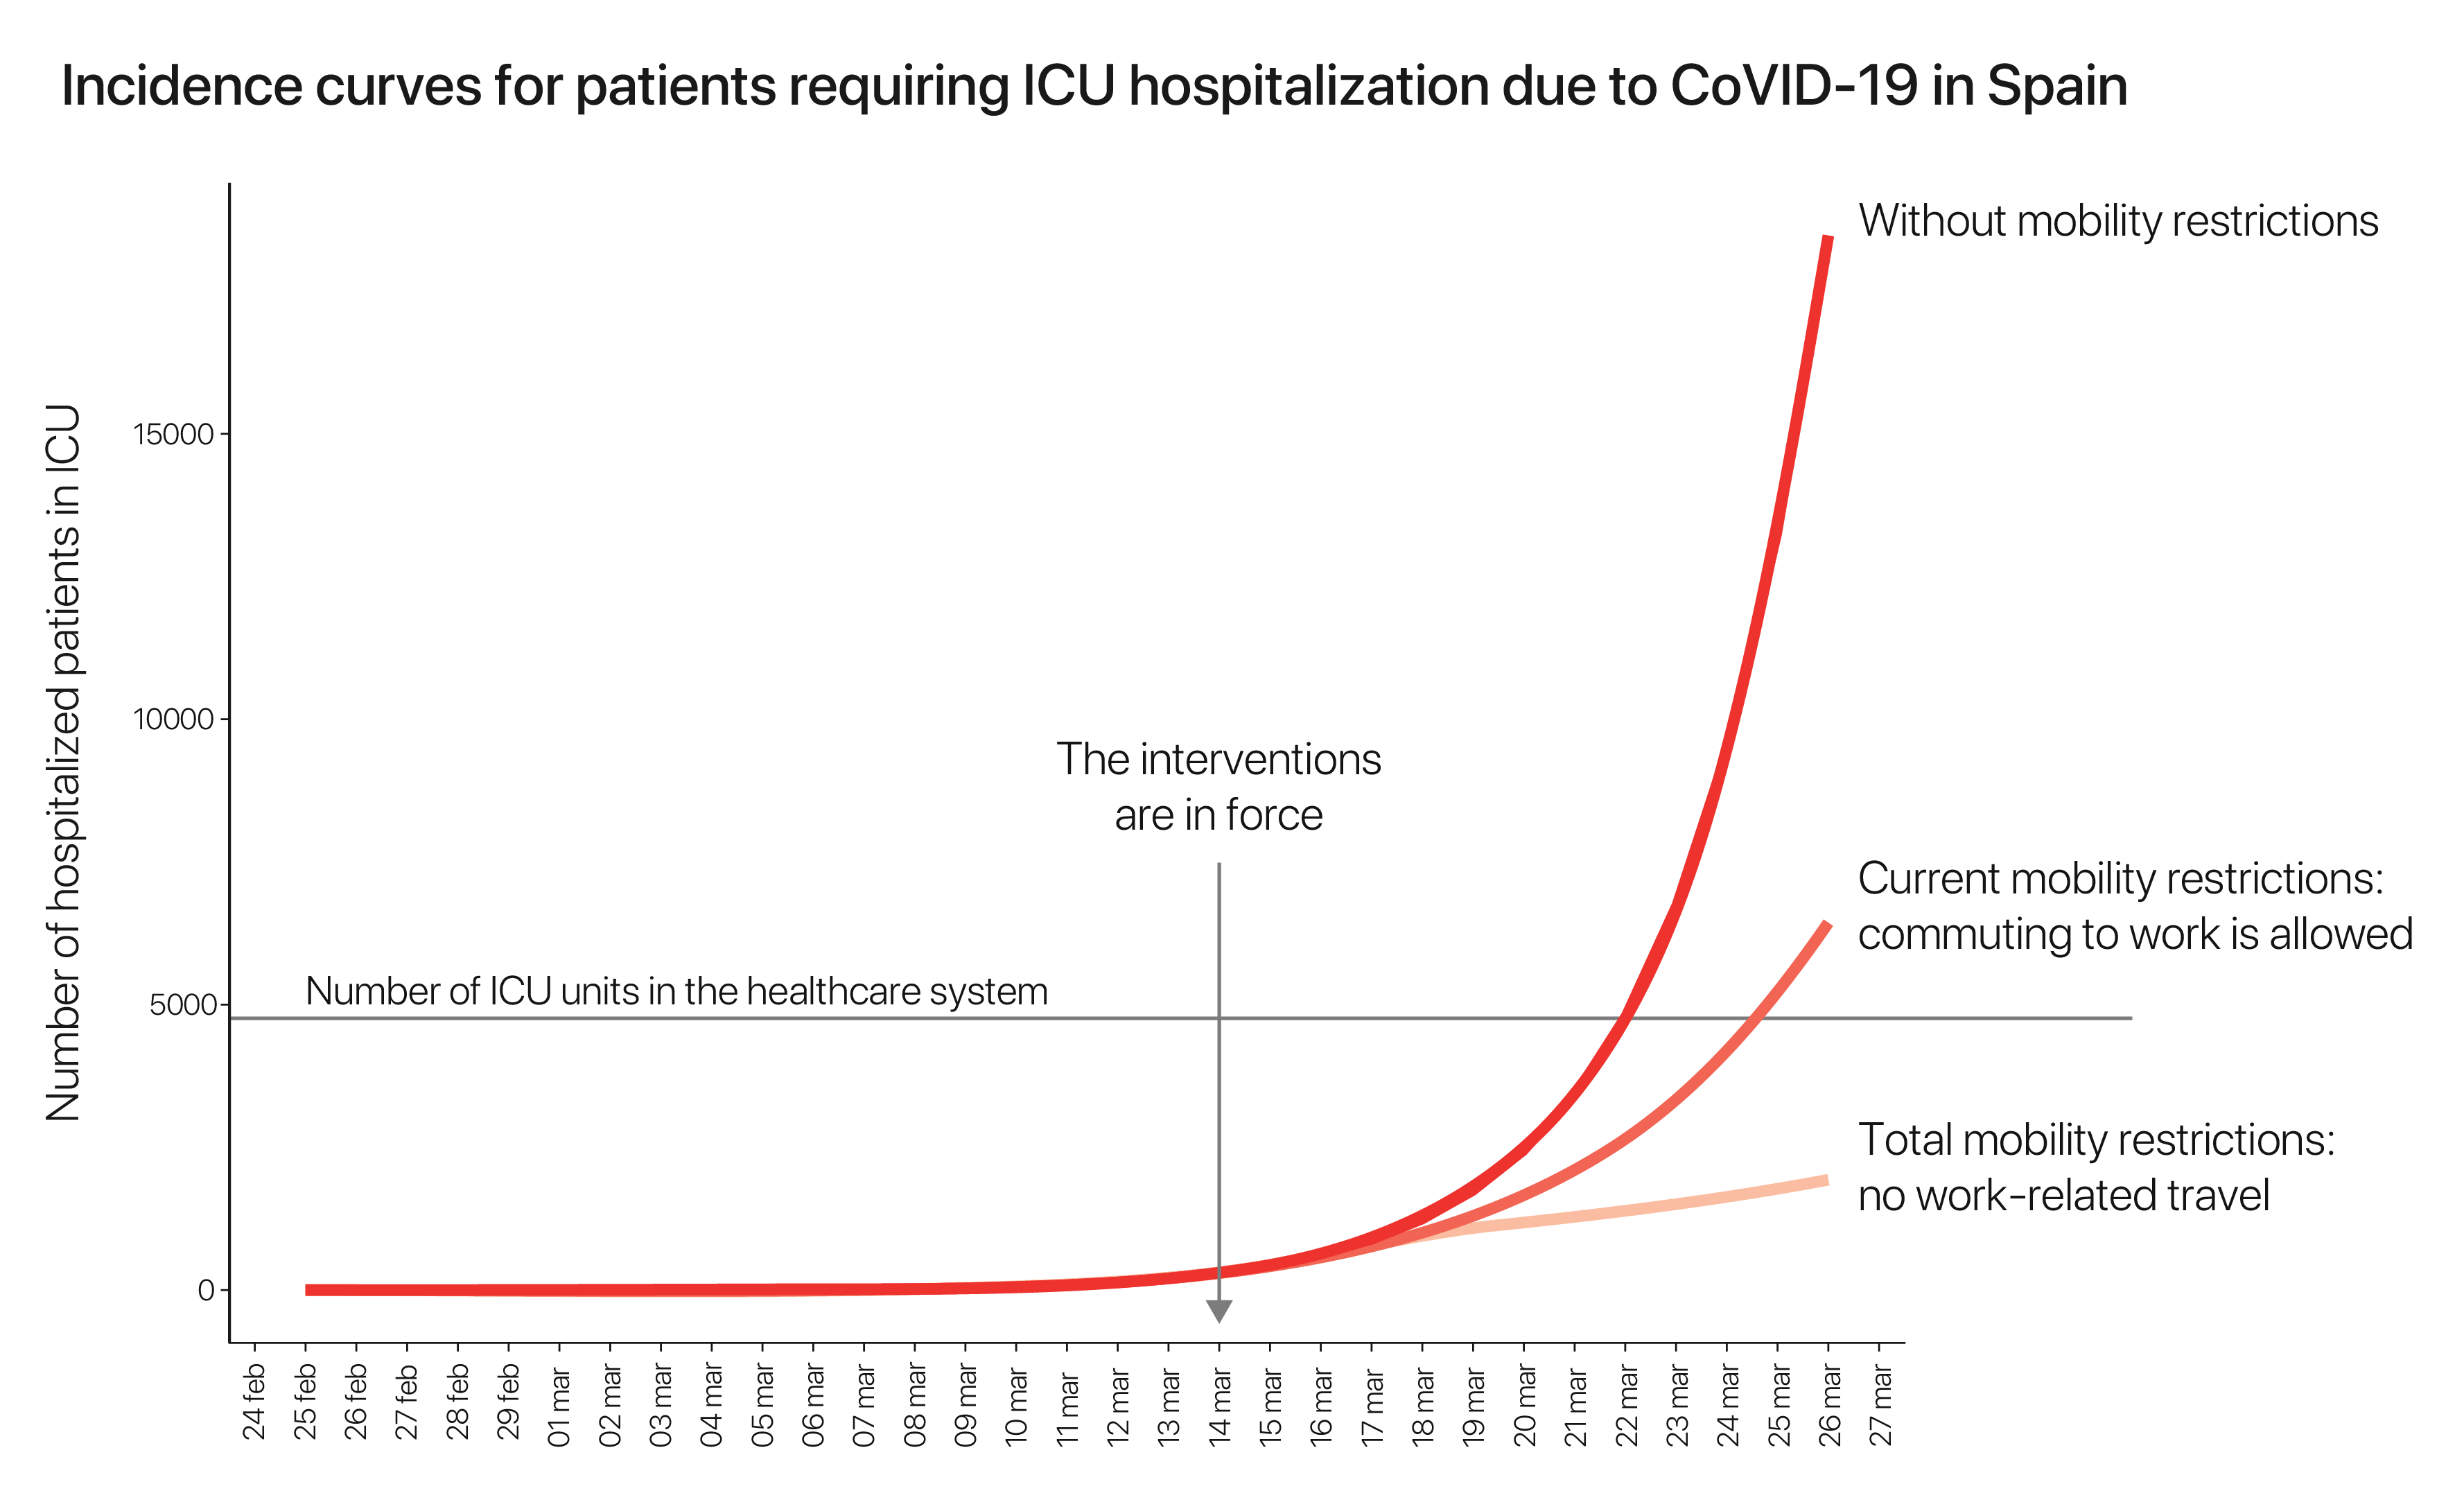 Incidence curves for COVID patients requiring ICU hospitalization.